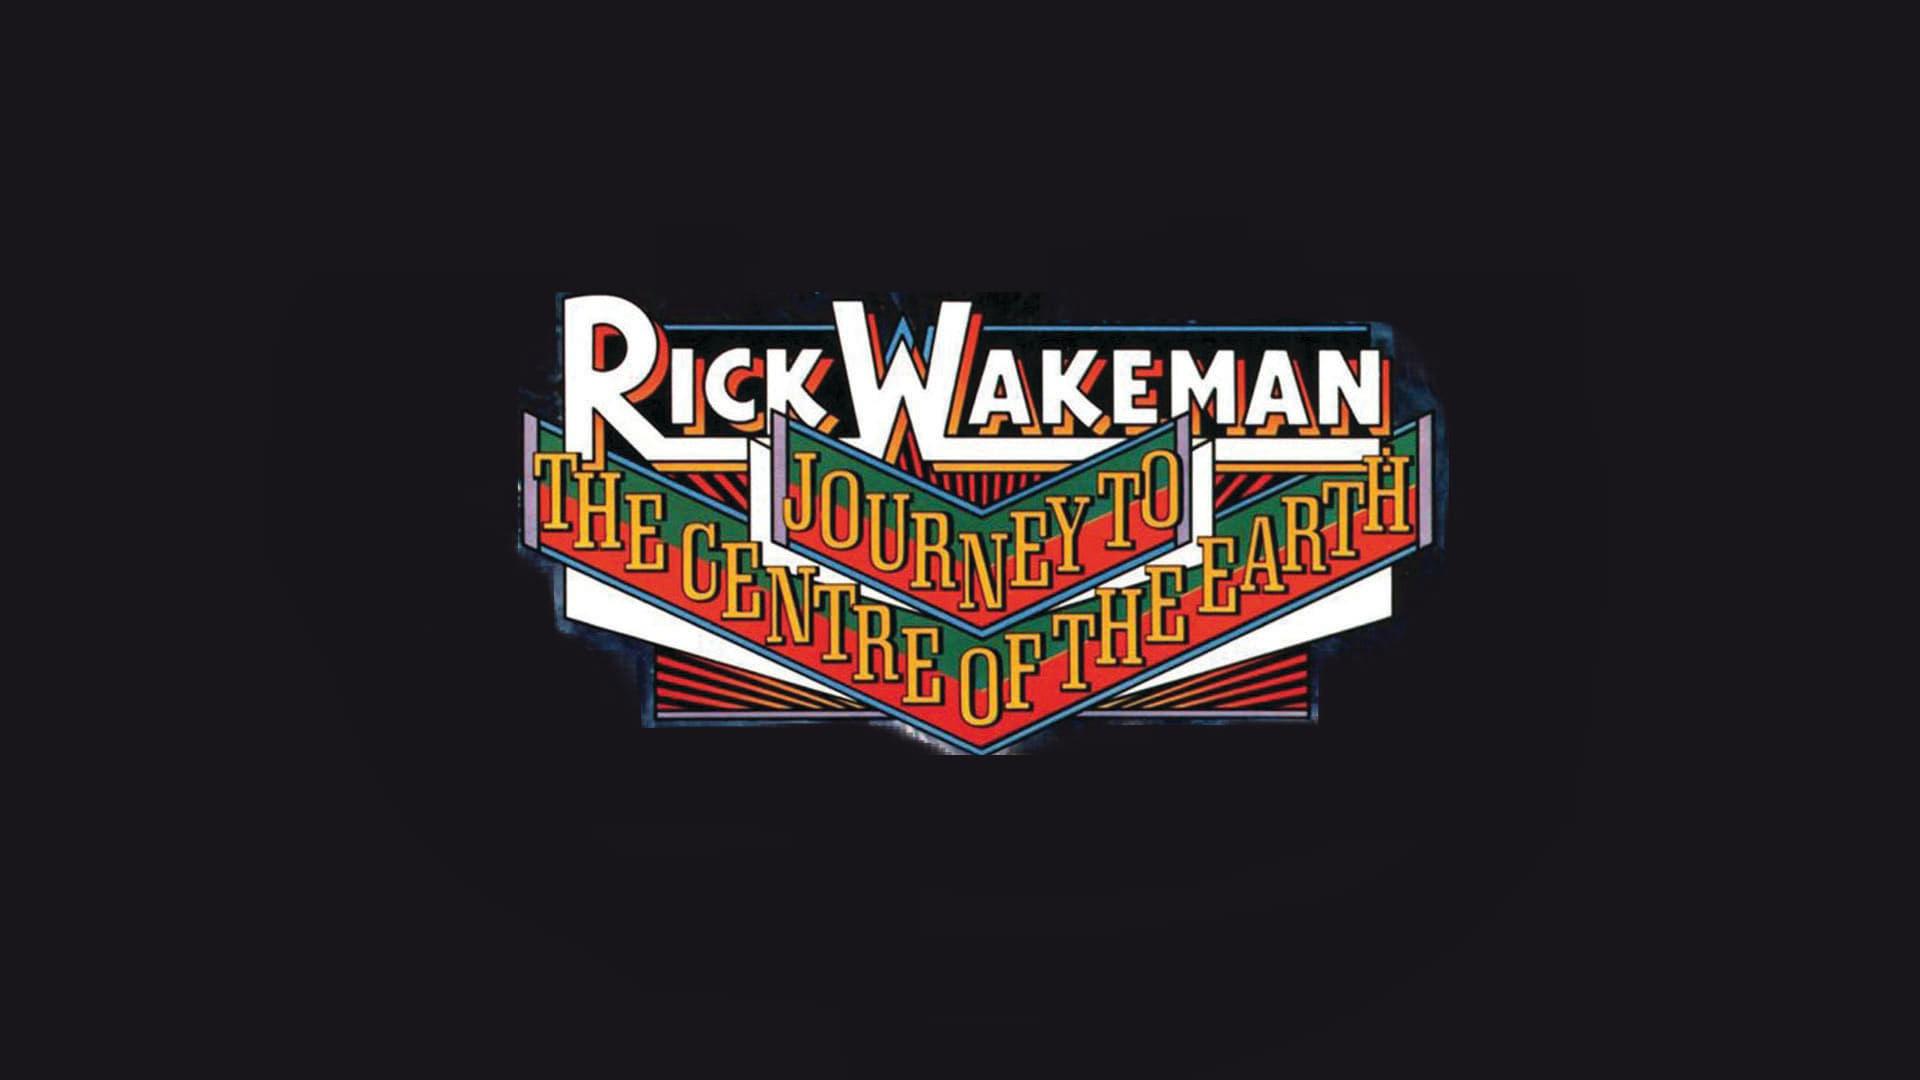 Rick Wakeman - Journey To The Centre Of The Earth backdrop